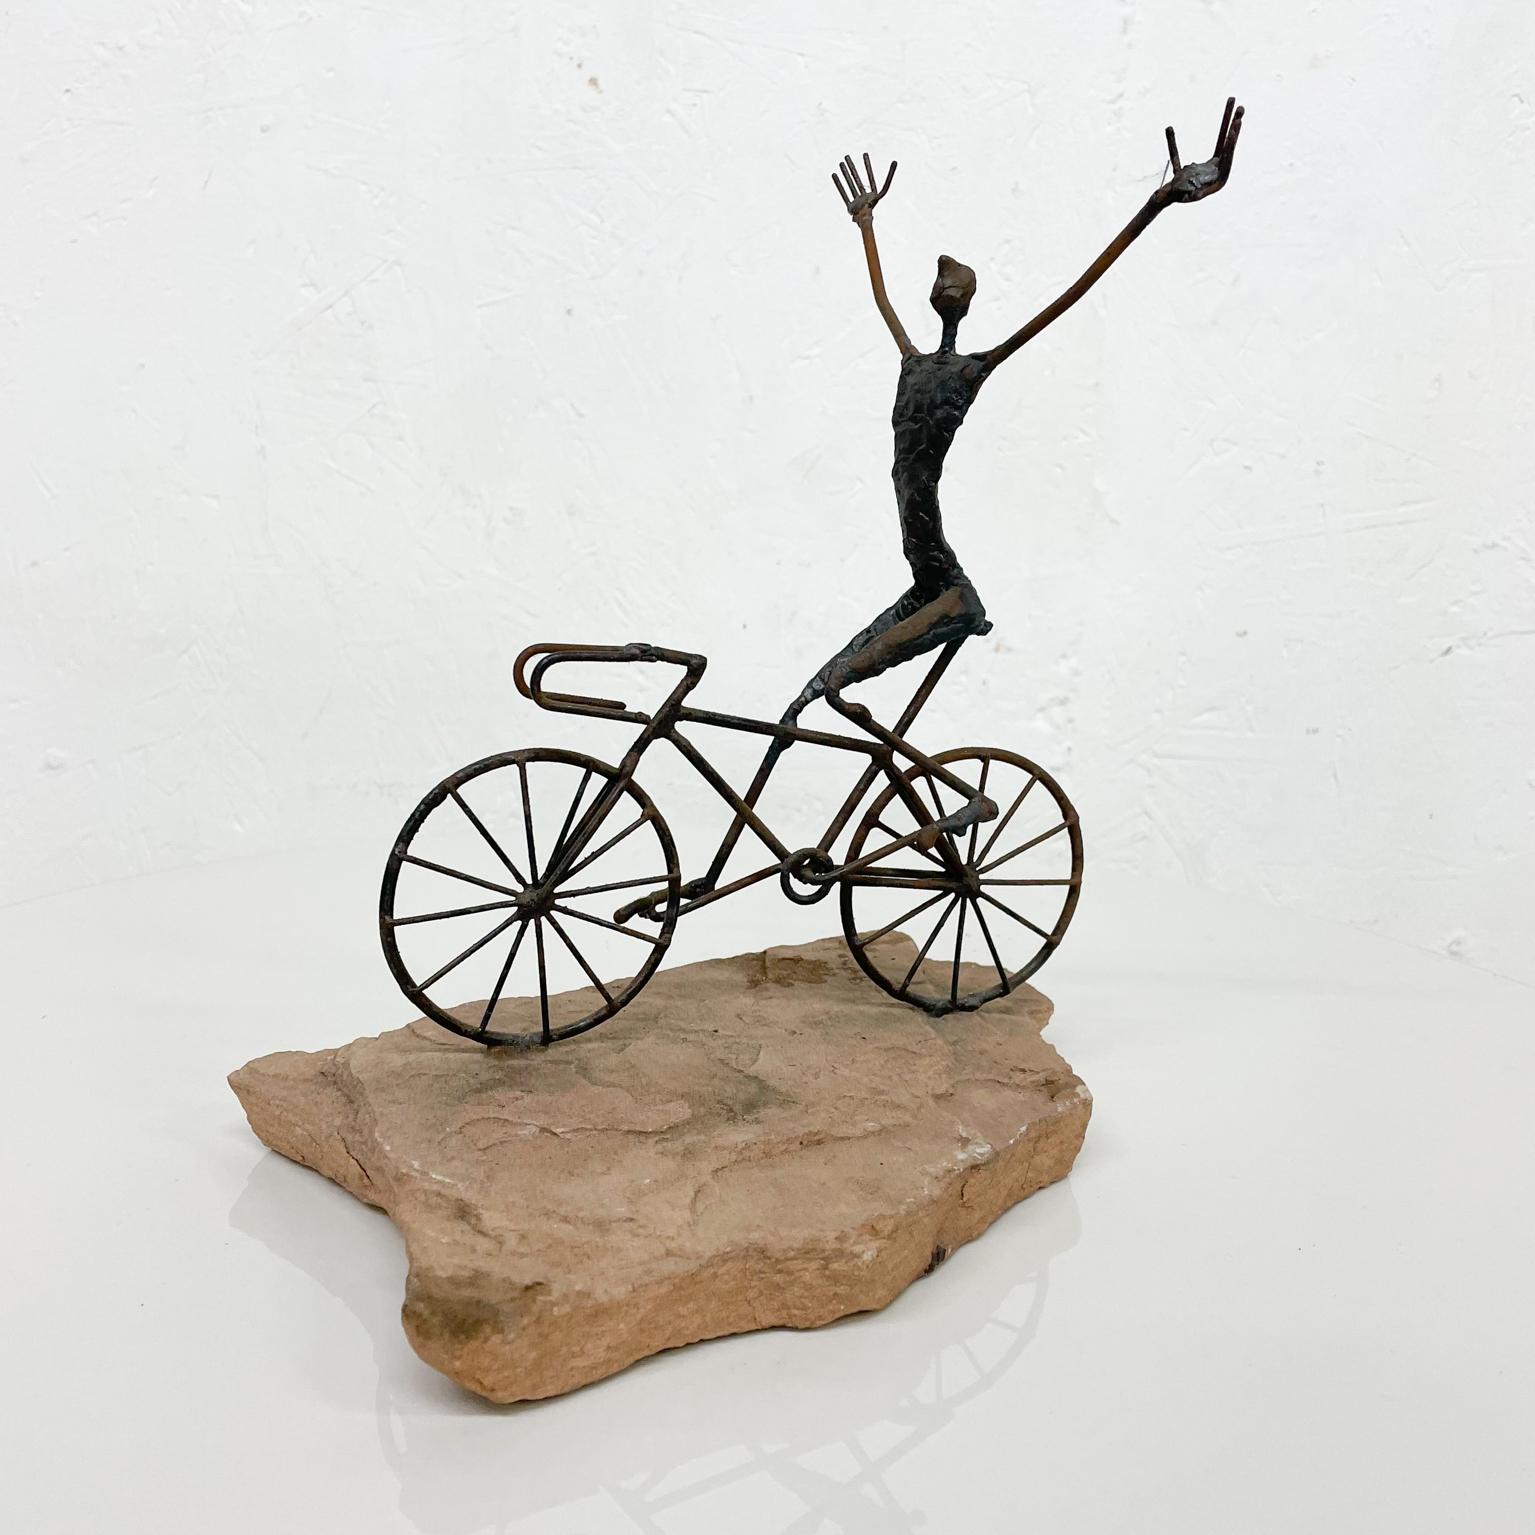 Sculpture
In the style of Jack Boyd metal Art Bicyclist sculpture 1970s
Unmarked
Poetic Art bicycle bike rider metal sculpture on stone base in the style of Jack Boyd
Measures: 10 H x 5.75 W x 9 D inches
In Preowned vintage condition.
Refer to